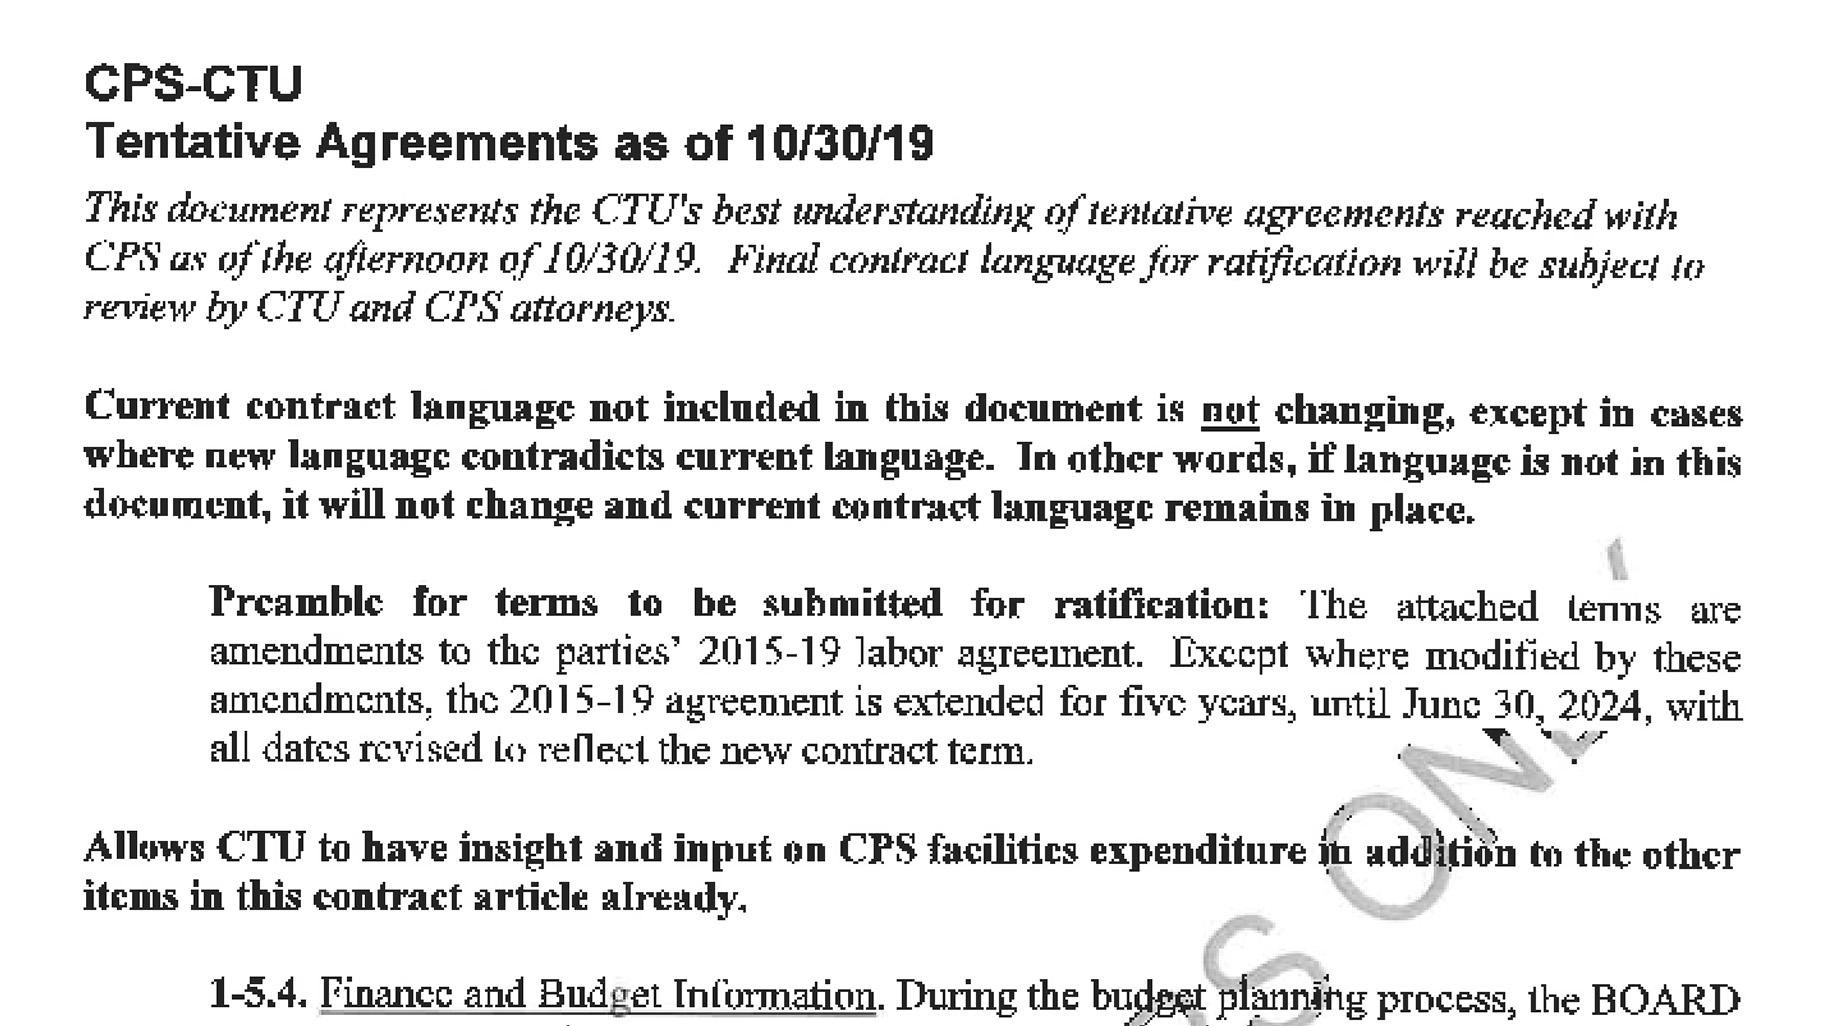 Document: Read the tentative agreement.